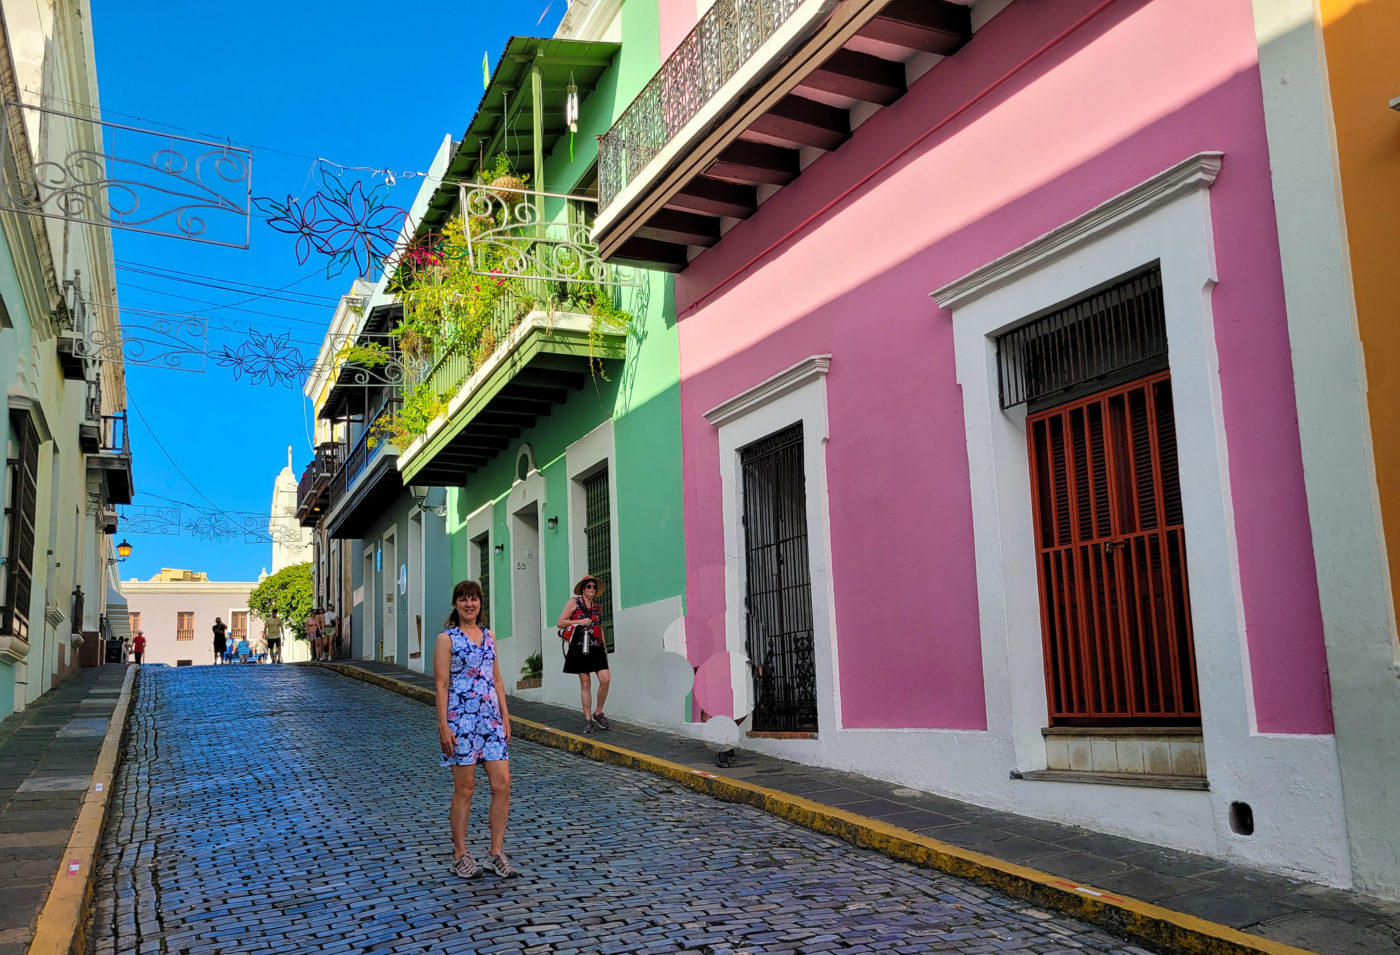 The Ultimate Guide to San Juan, Puerto Rico and 20 Top Attractions